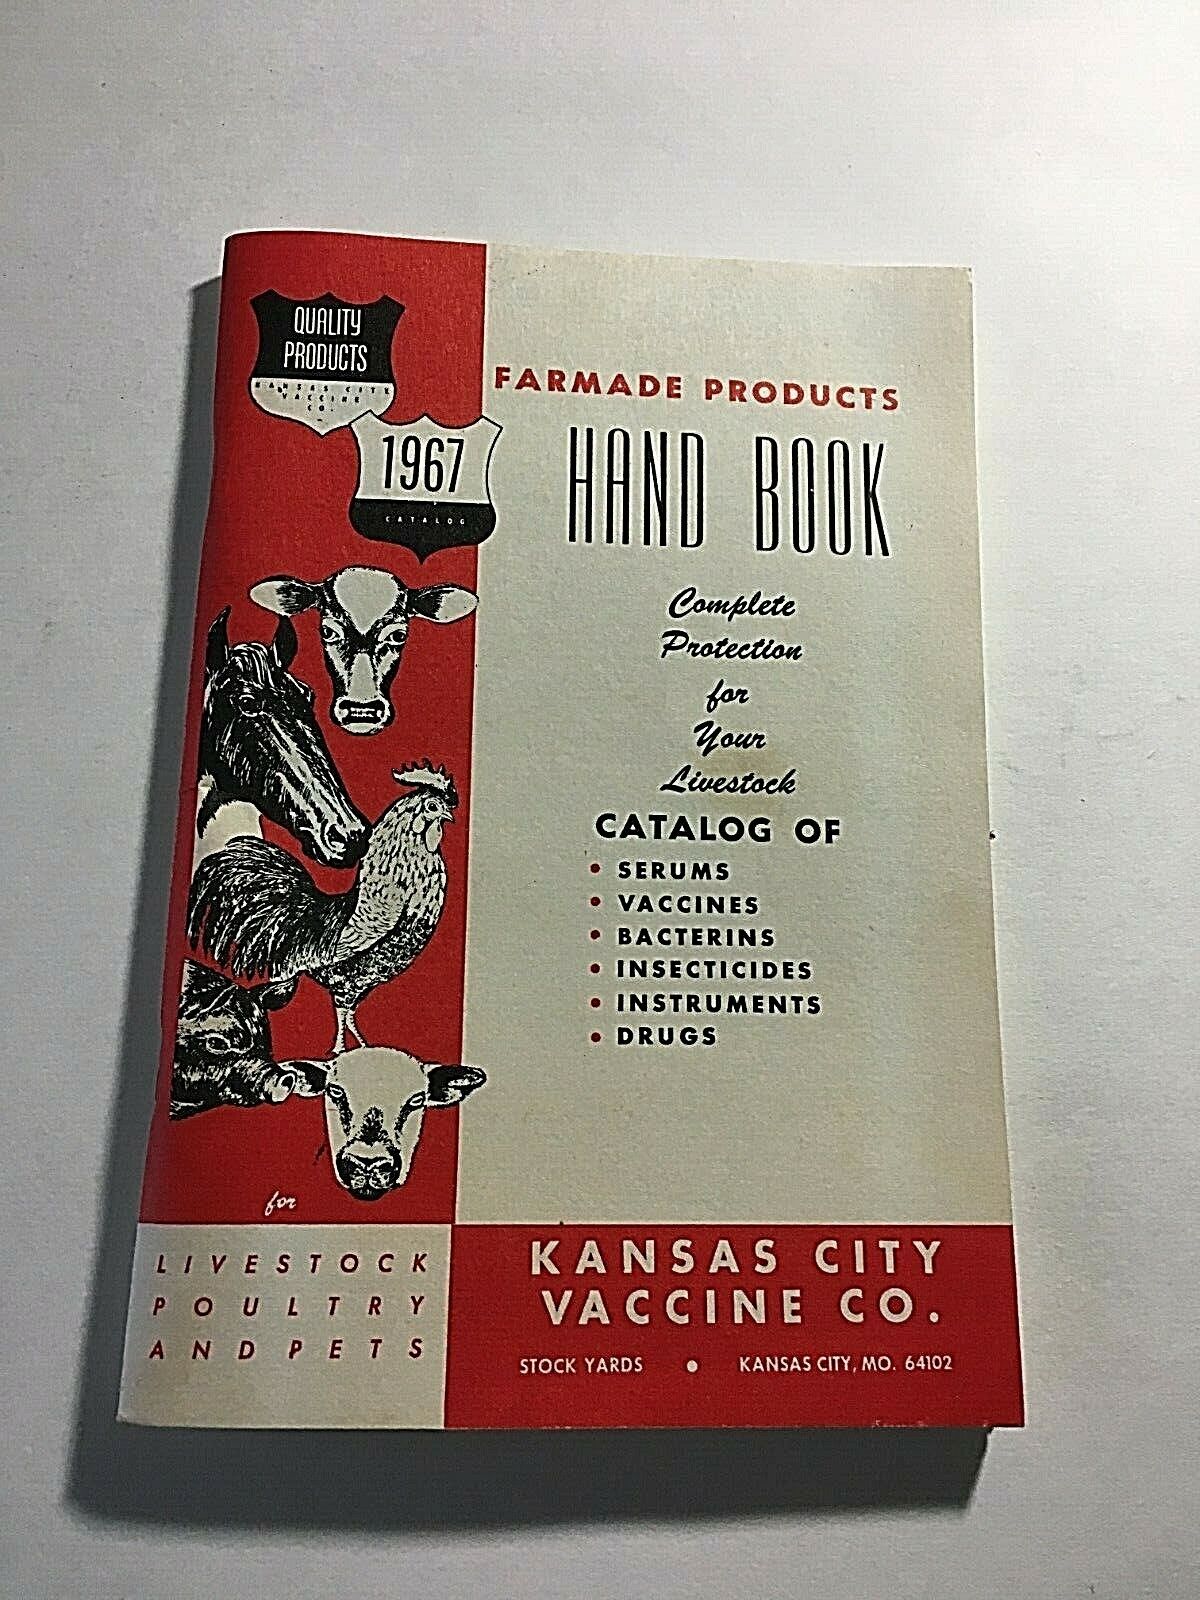 1967 Farmade Products Hand Book ~ Farming Livestock Catalog of Drugs and Info